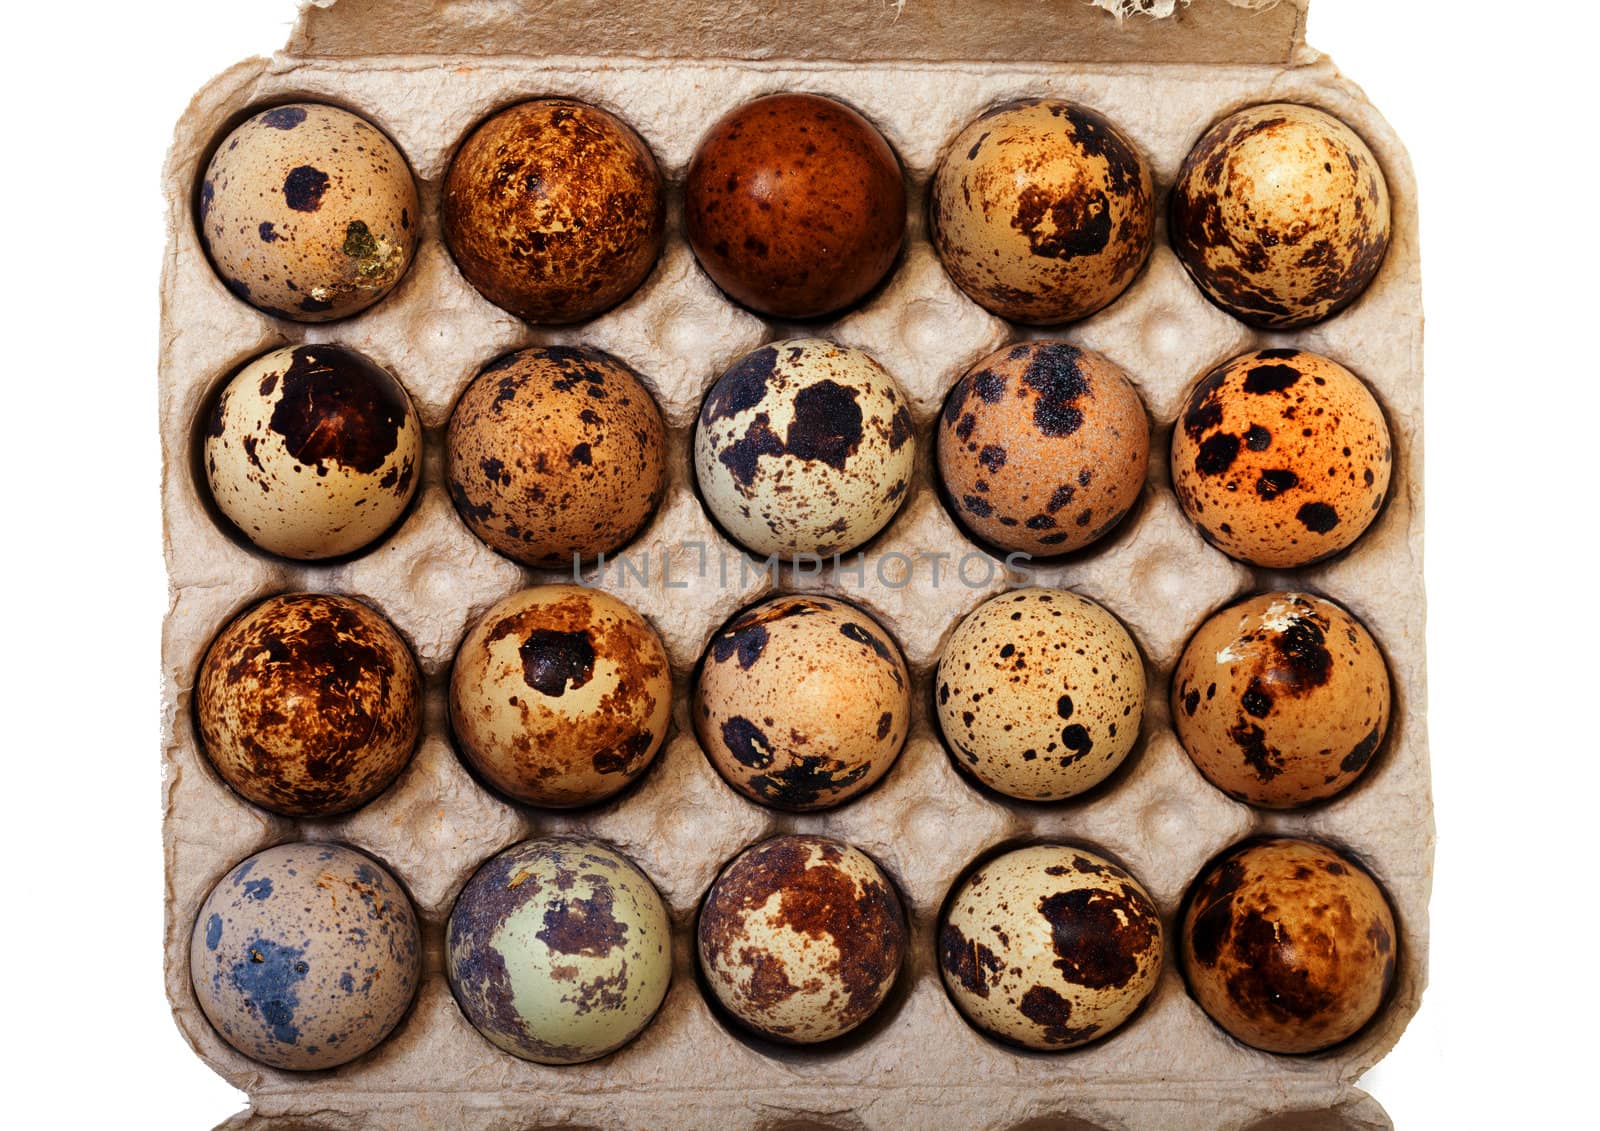 Speckled quail eggs in a carton box by Discovod